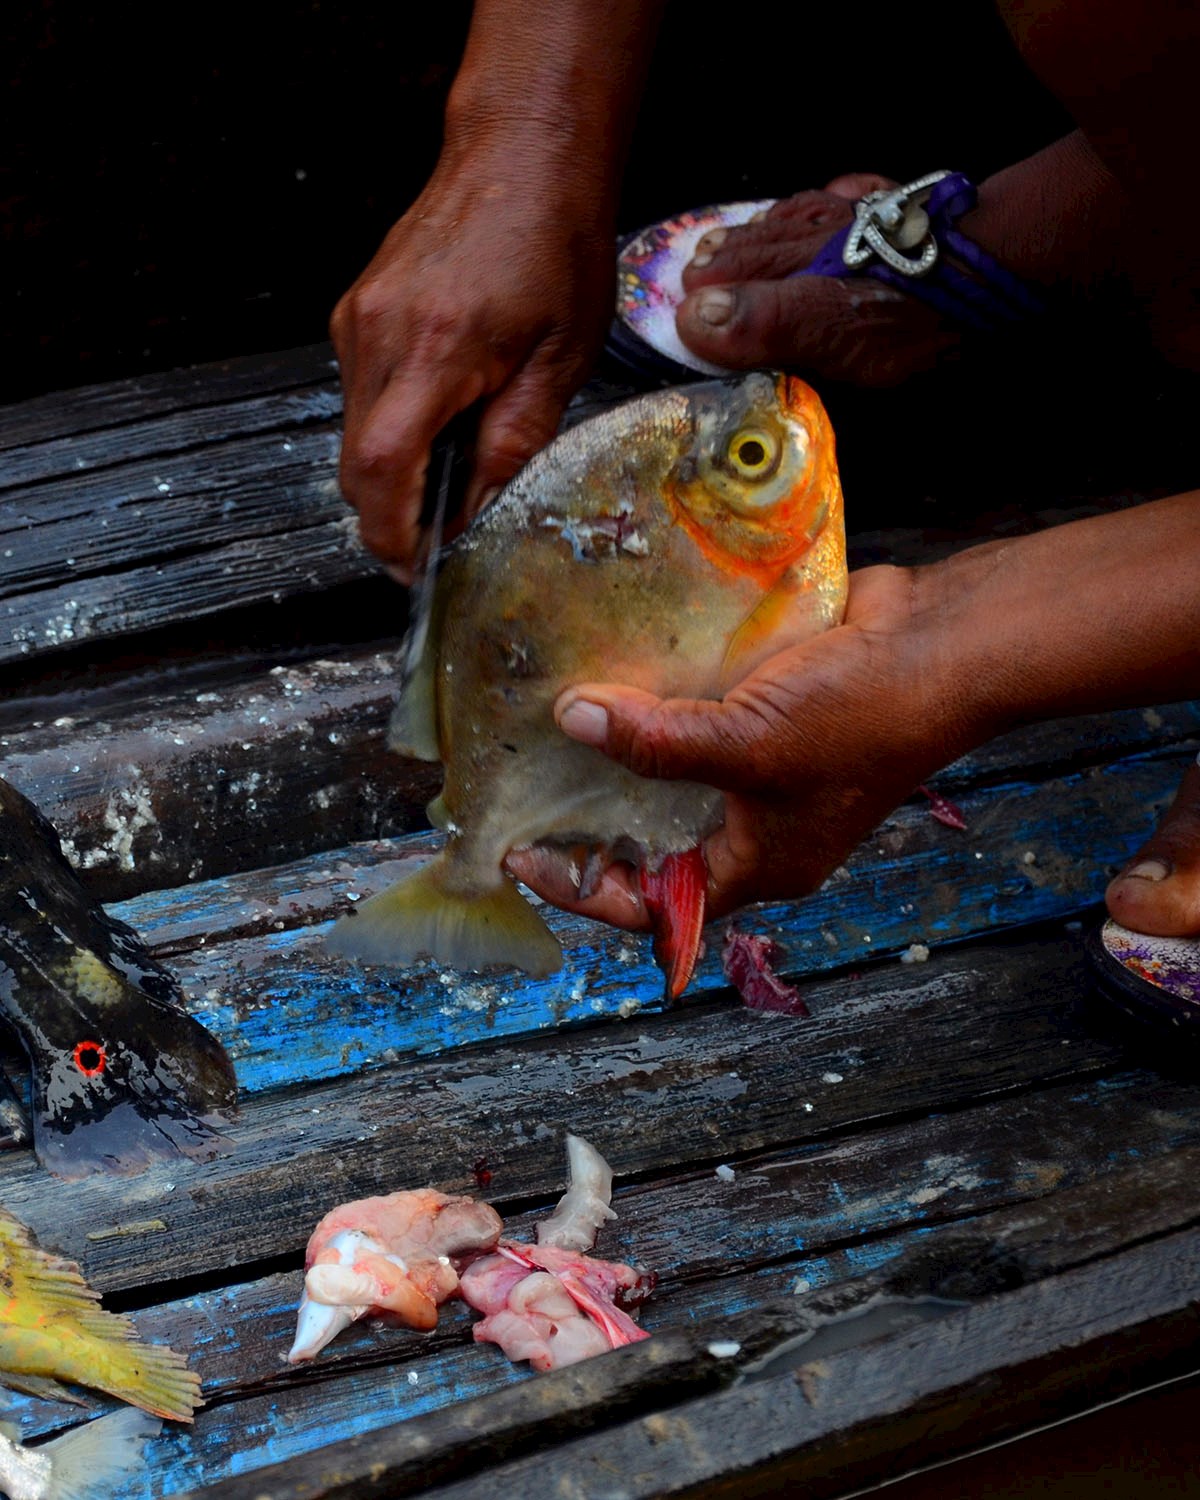 Amazon River is home to up to 2,000 fish species - 